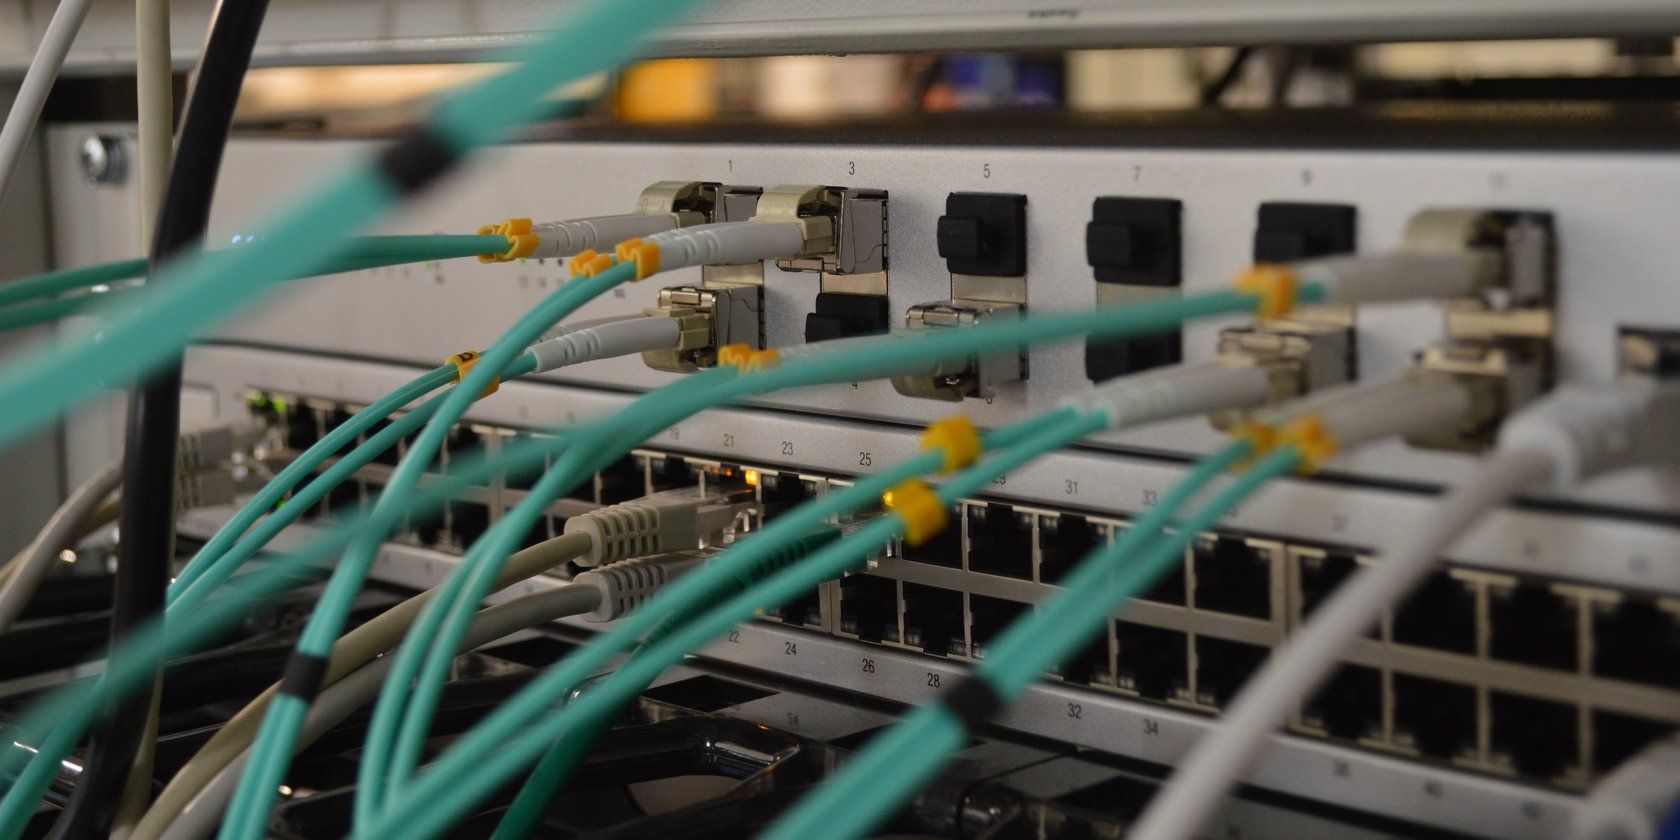 Cables in a white ethernet switch.